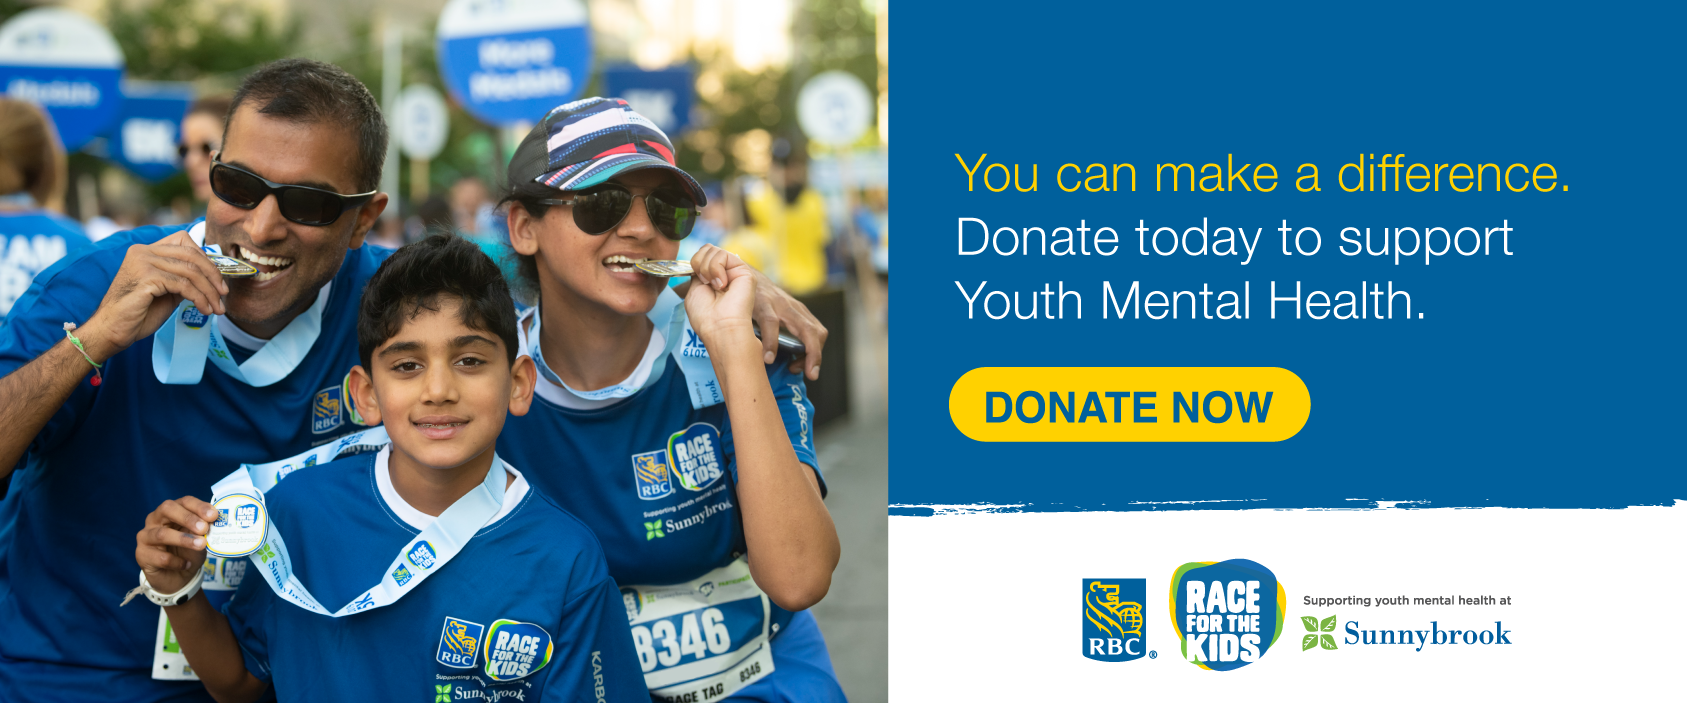 RBC race for youth mental health